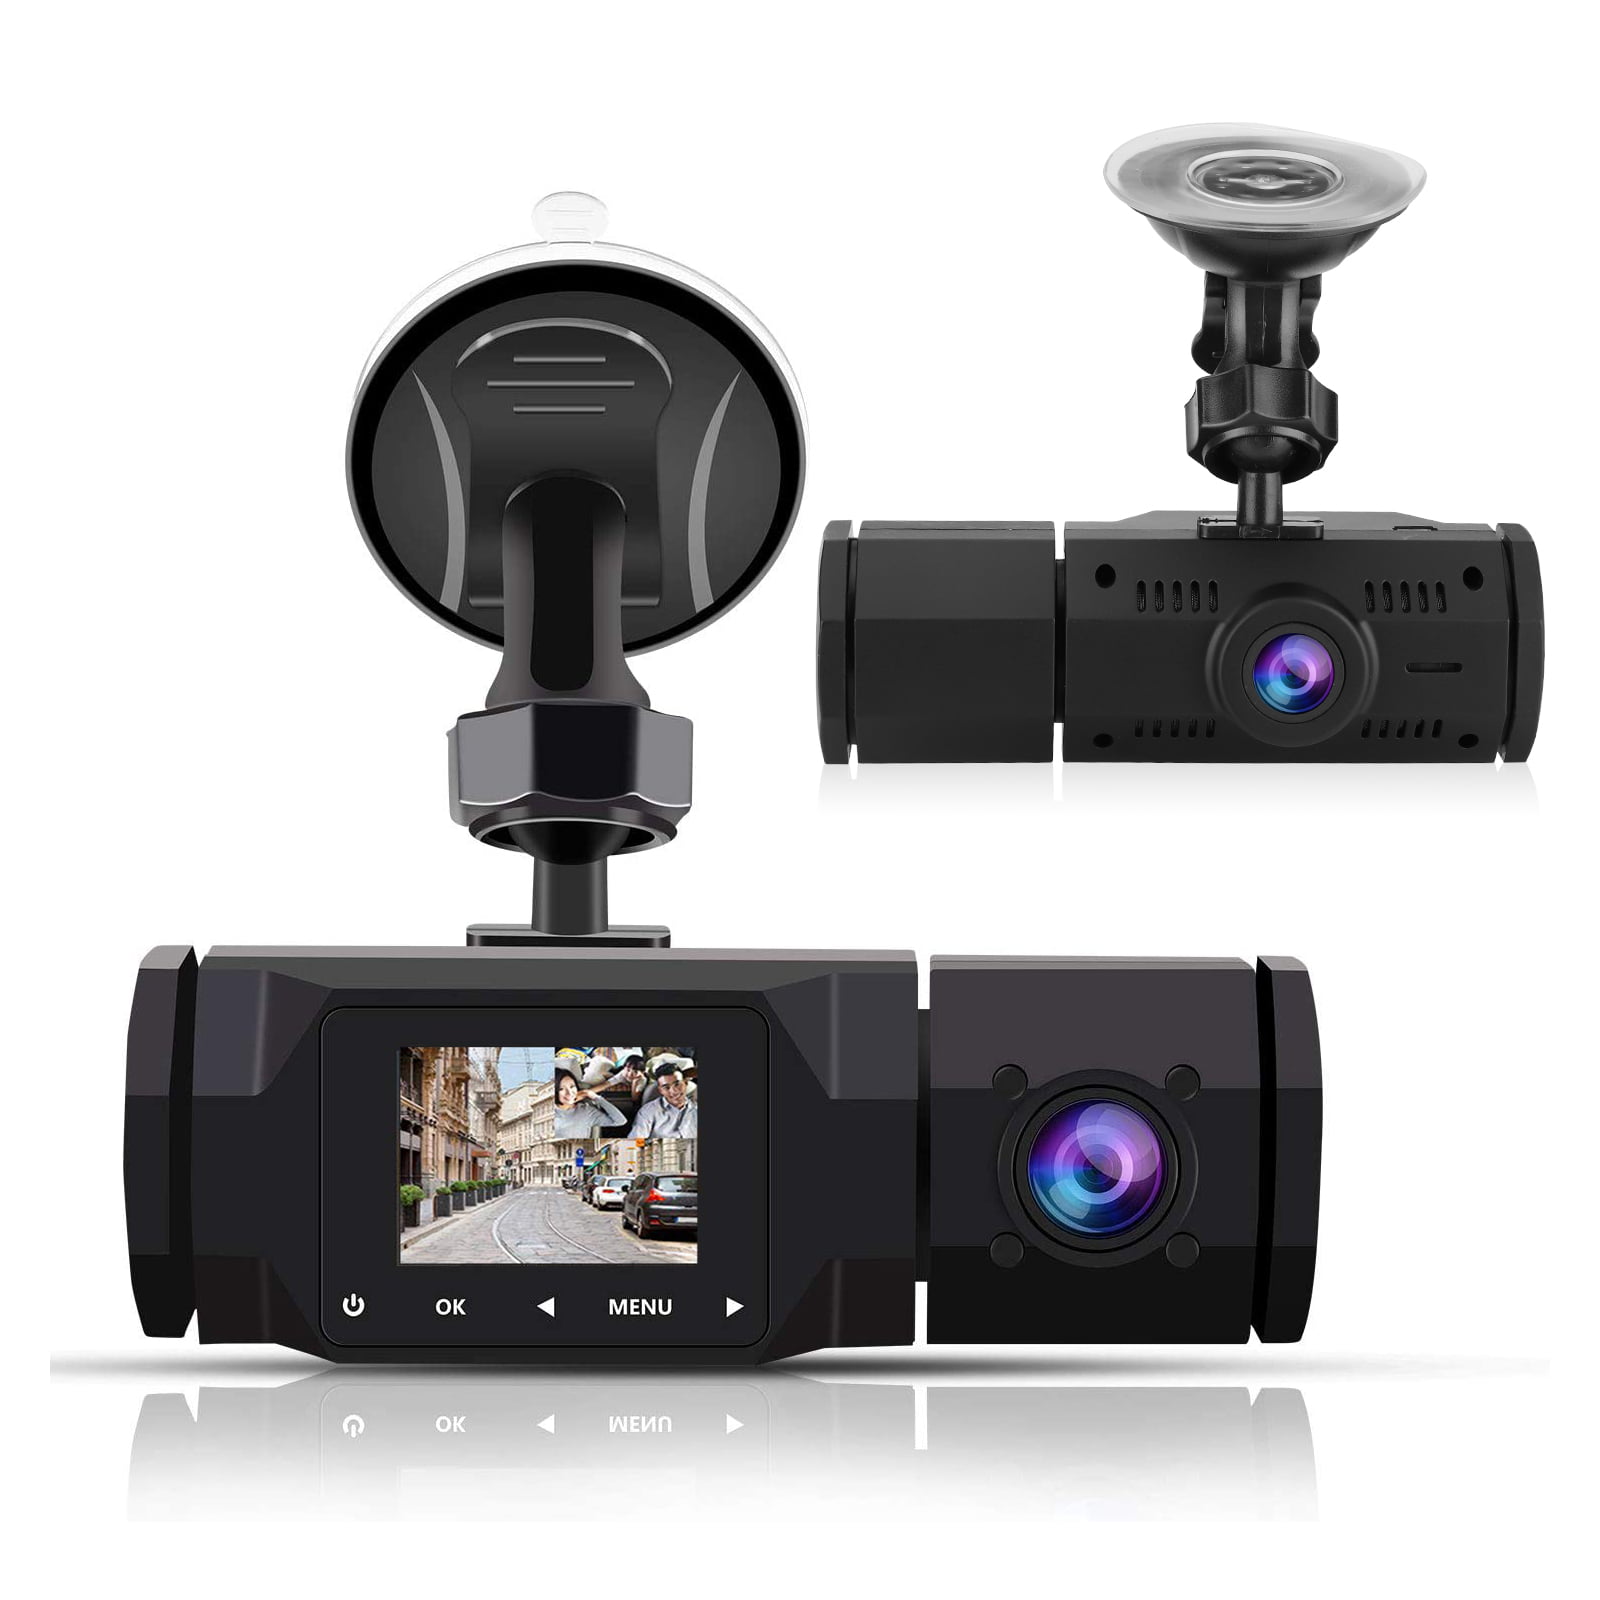 6G Lens WDR 170°Wide Angel G-Sense Parking Monitoring Mibao Dash Cam Dashcams for Cars 1080P Mini Car Cameras with Loop Recording Motion Detection